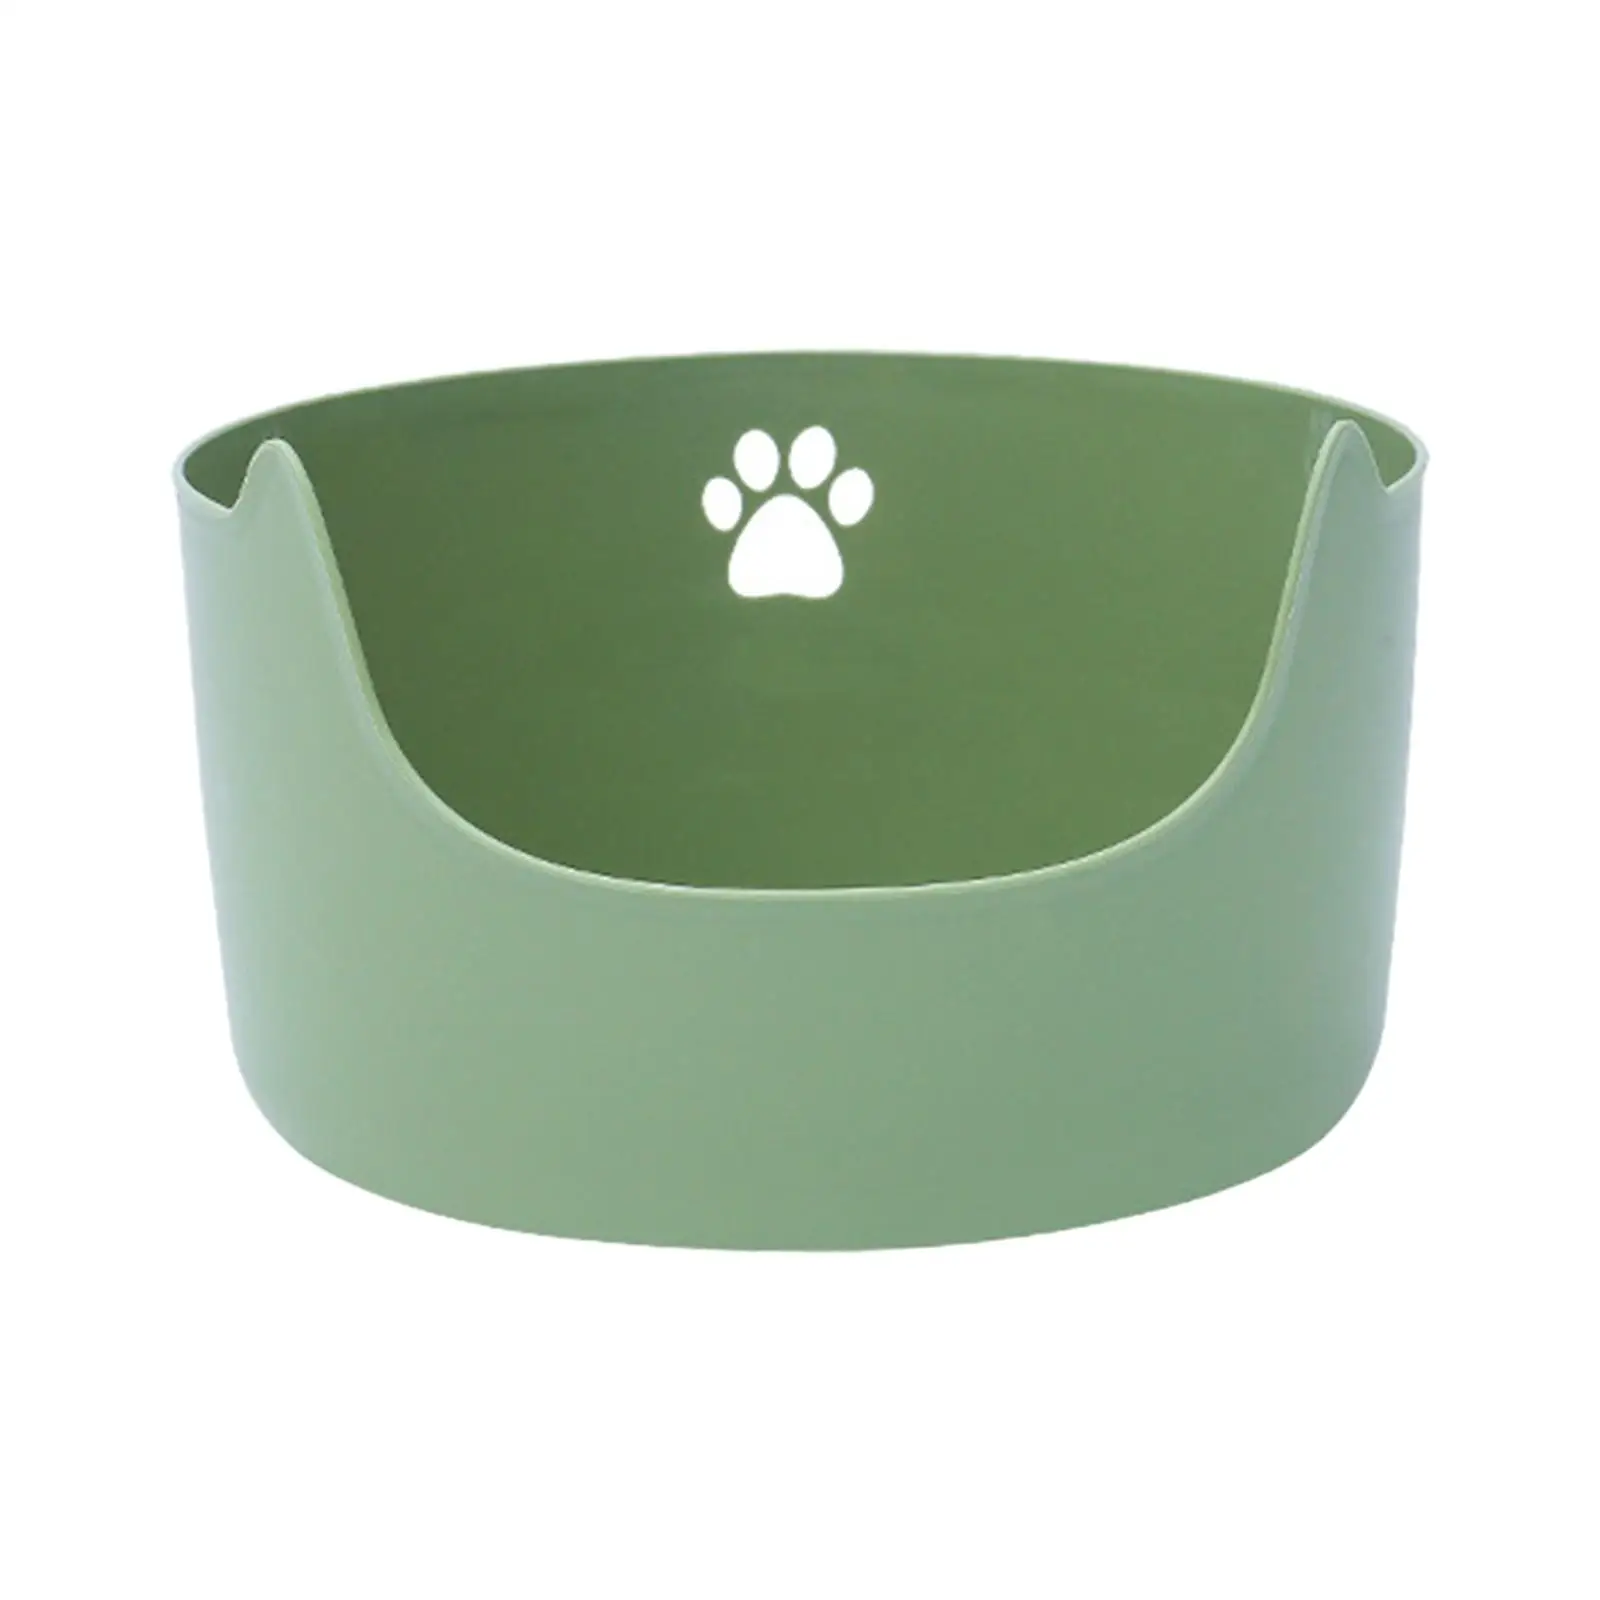 Cats Litter Pan with High Sides Pet Supplies Nonstick Durable Open Cats Litter Tray Large Space for Small and Large Cats